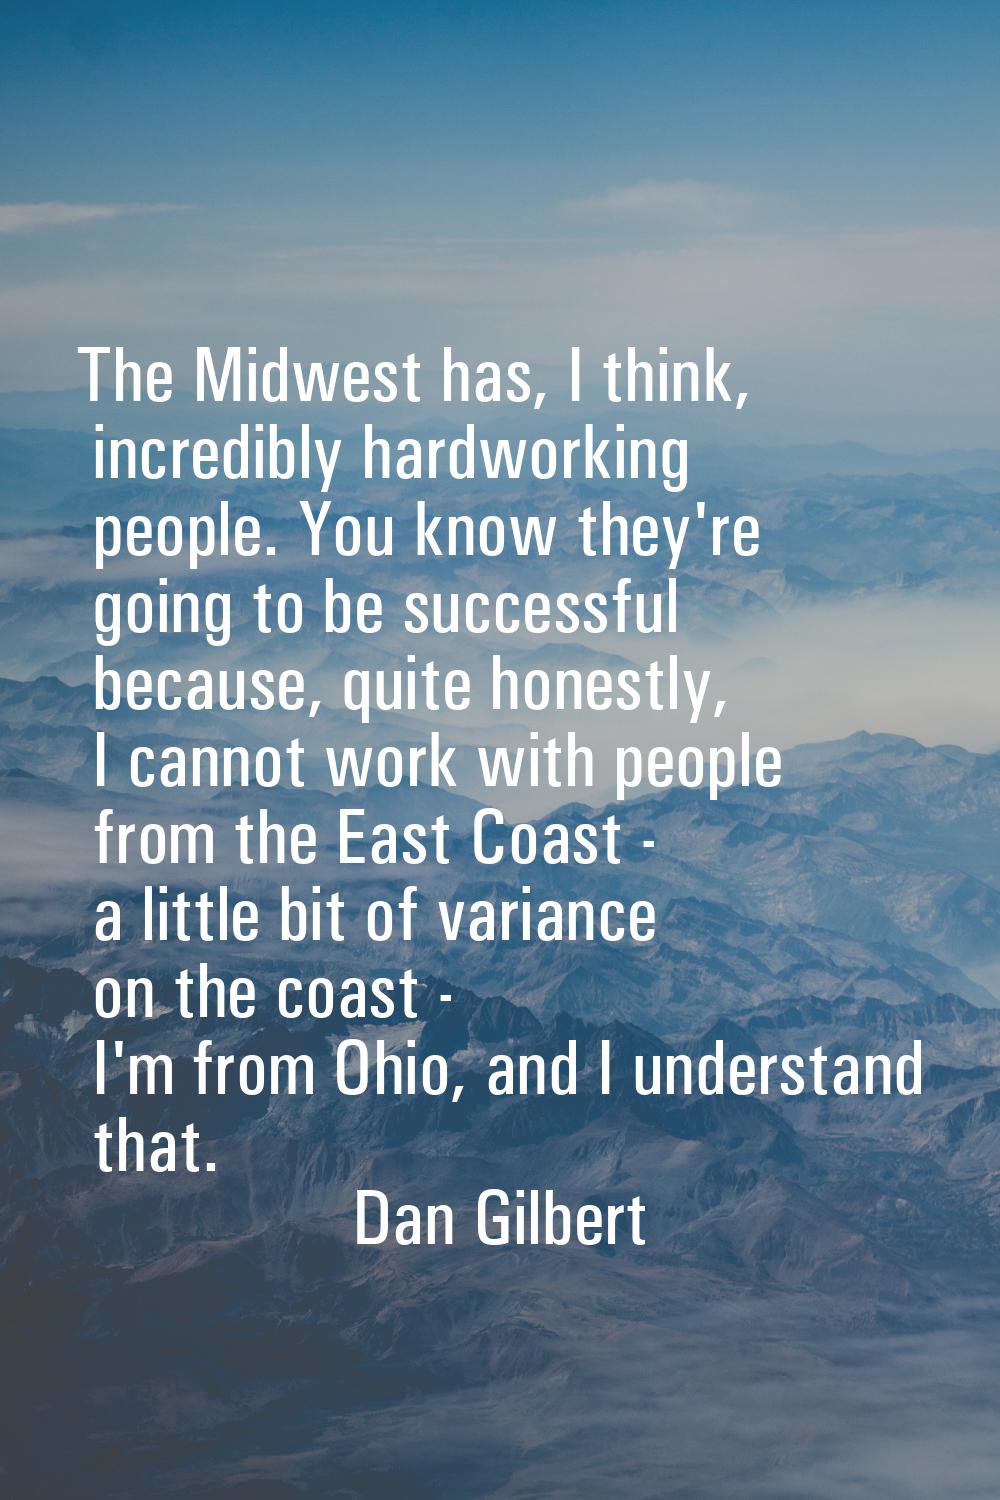 The Midwest has, I think, incredibly hardworking people. You know they're going to be successful be